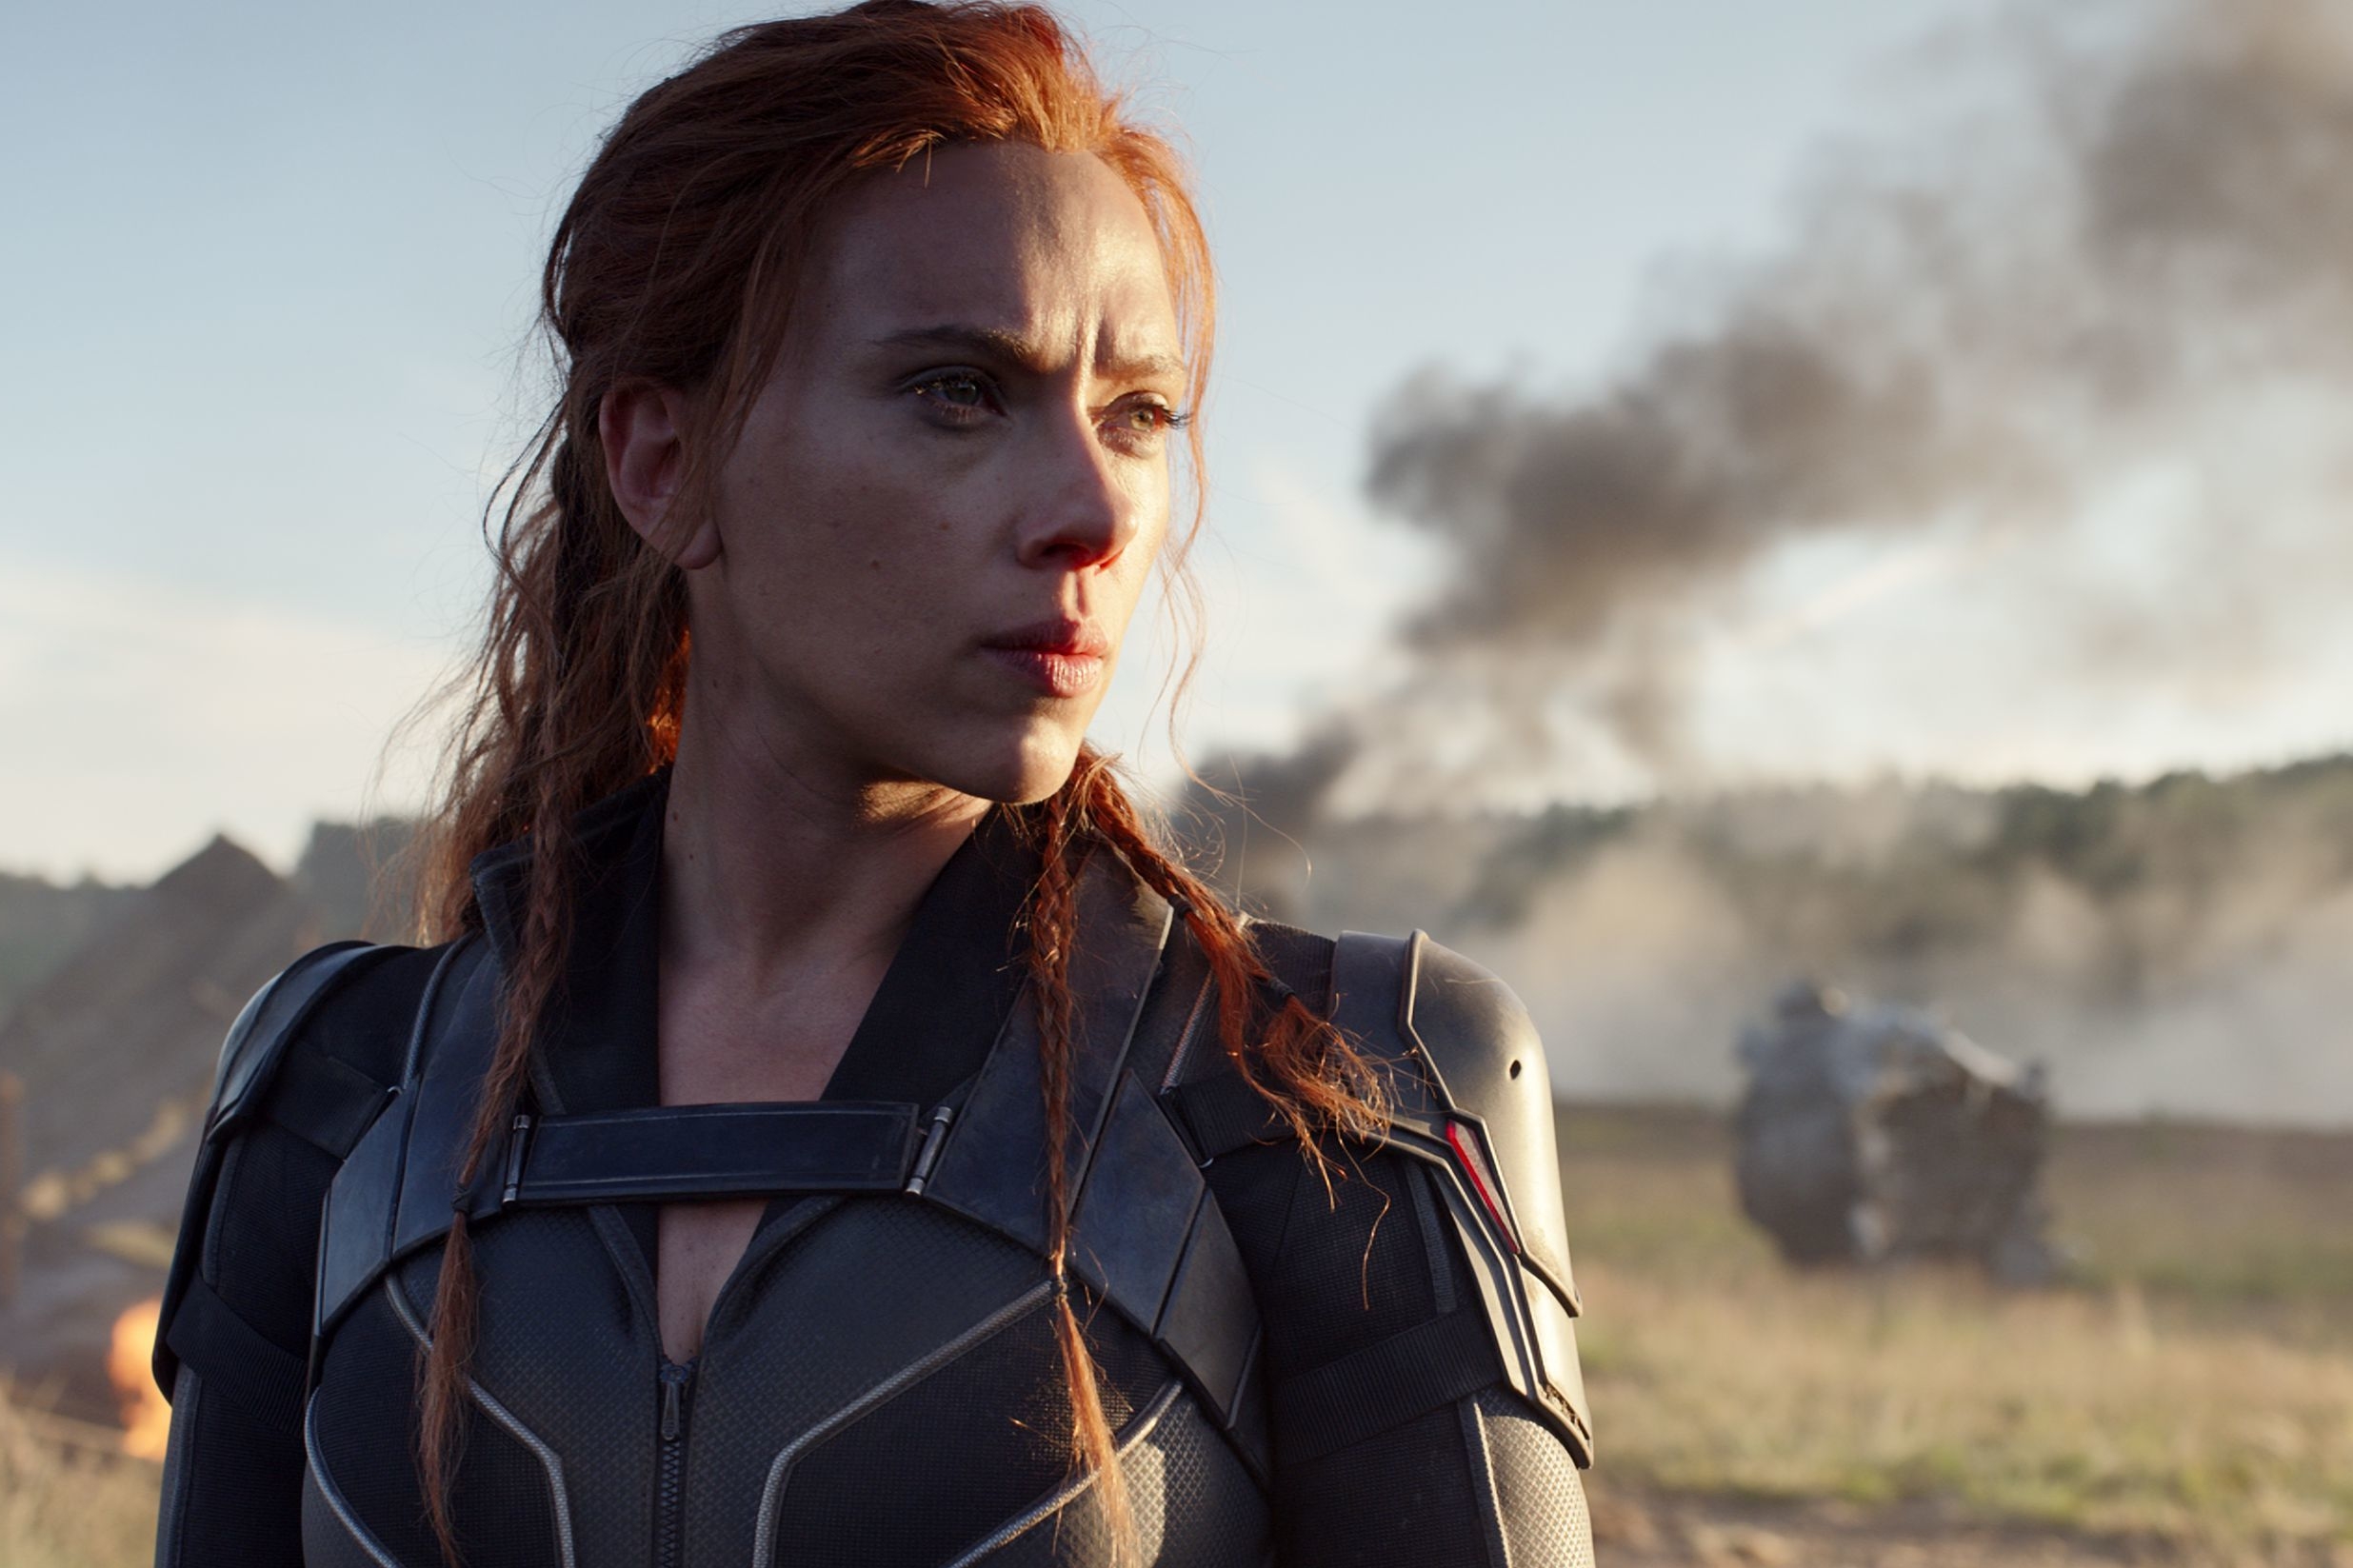 New movie releases in fall 2020 you can't miss: Black Widow, No Time to Die  and more